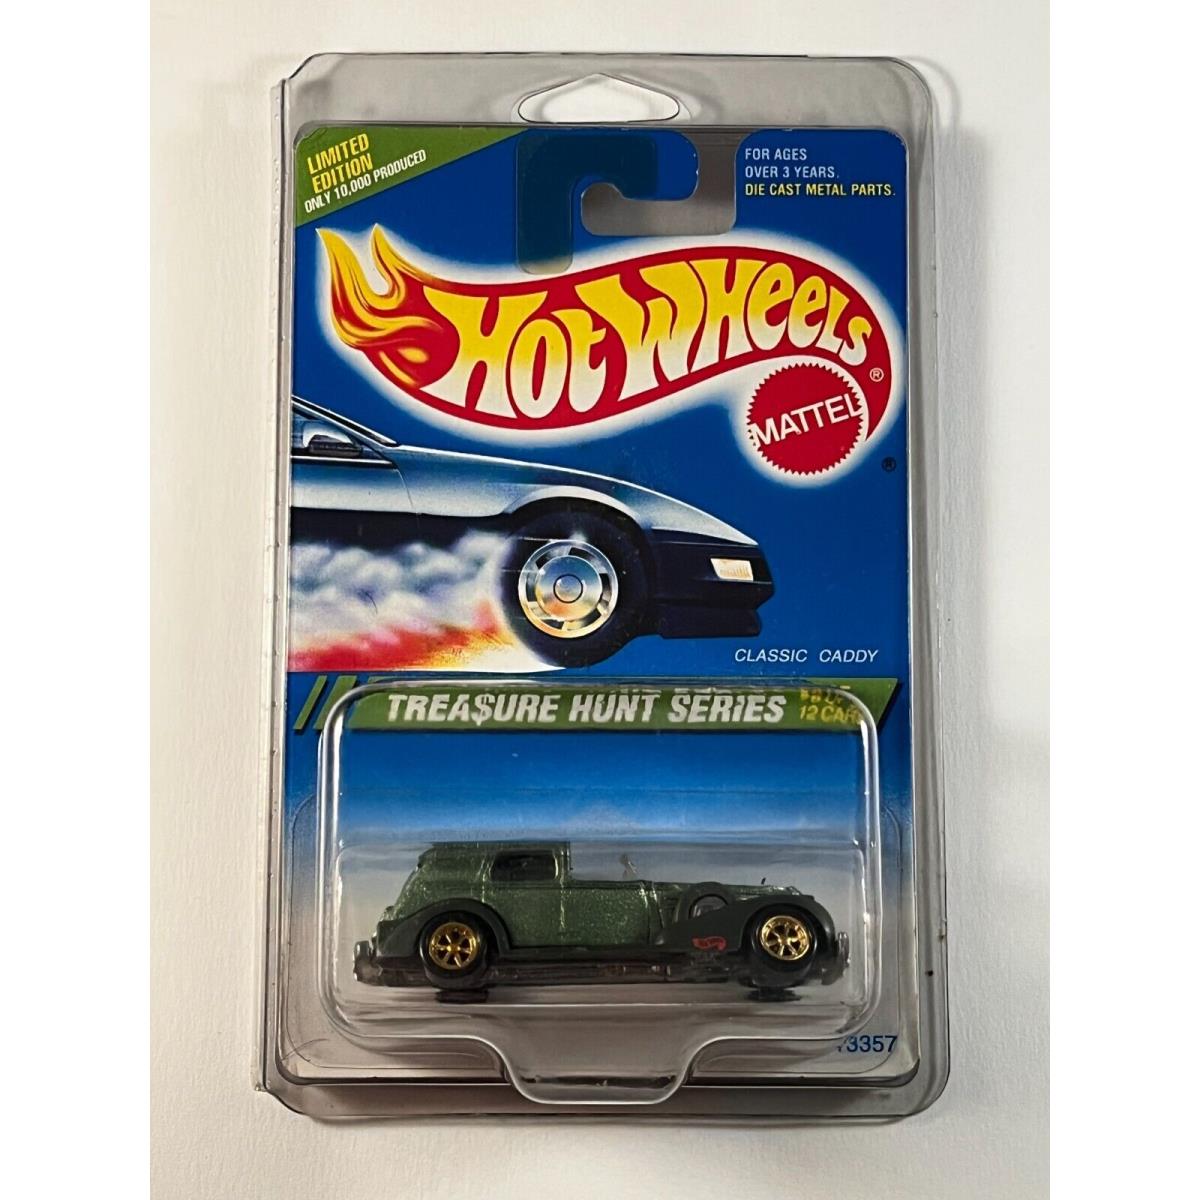 1995 Hot Wheels Treasure Hunt Series Classic Caddy Limited Edition /10 000